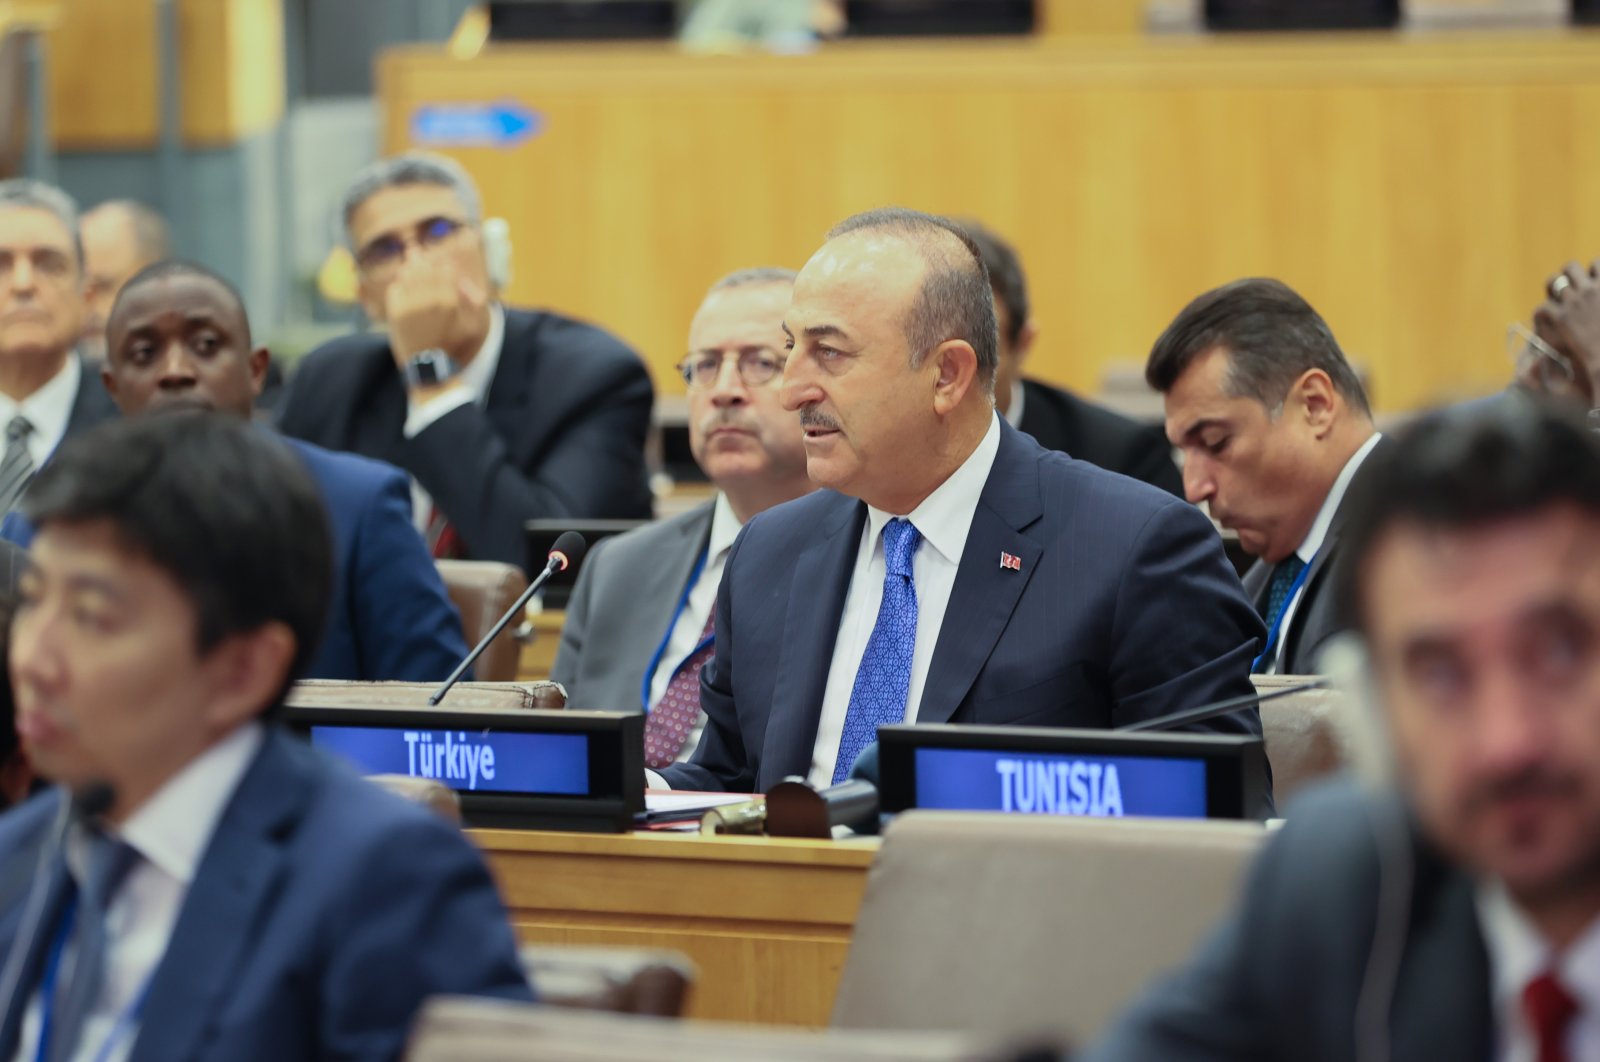 Foreign Minister Mevlüt Çavuşoğlu is seen during a meeting of the Organisation of Islamic Cooperation (OIC) in New York, U.S., Sept. 22, 2022 (AA Photo)